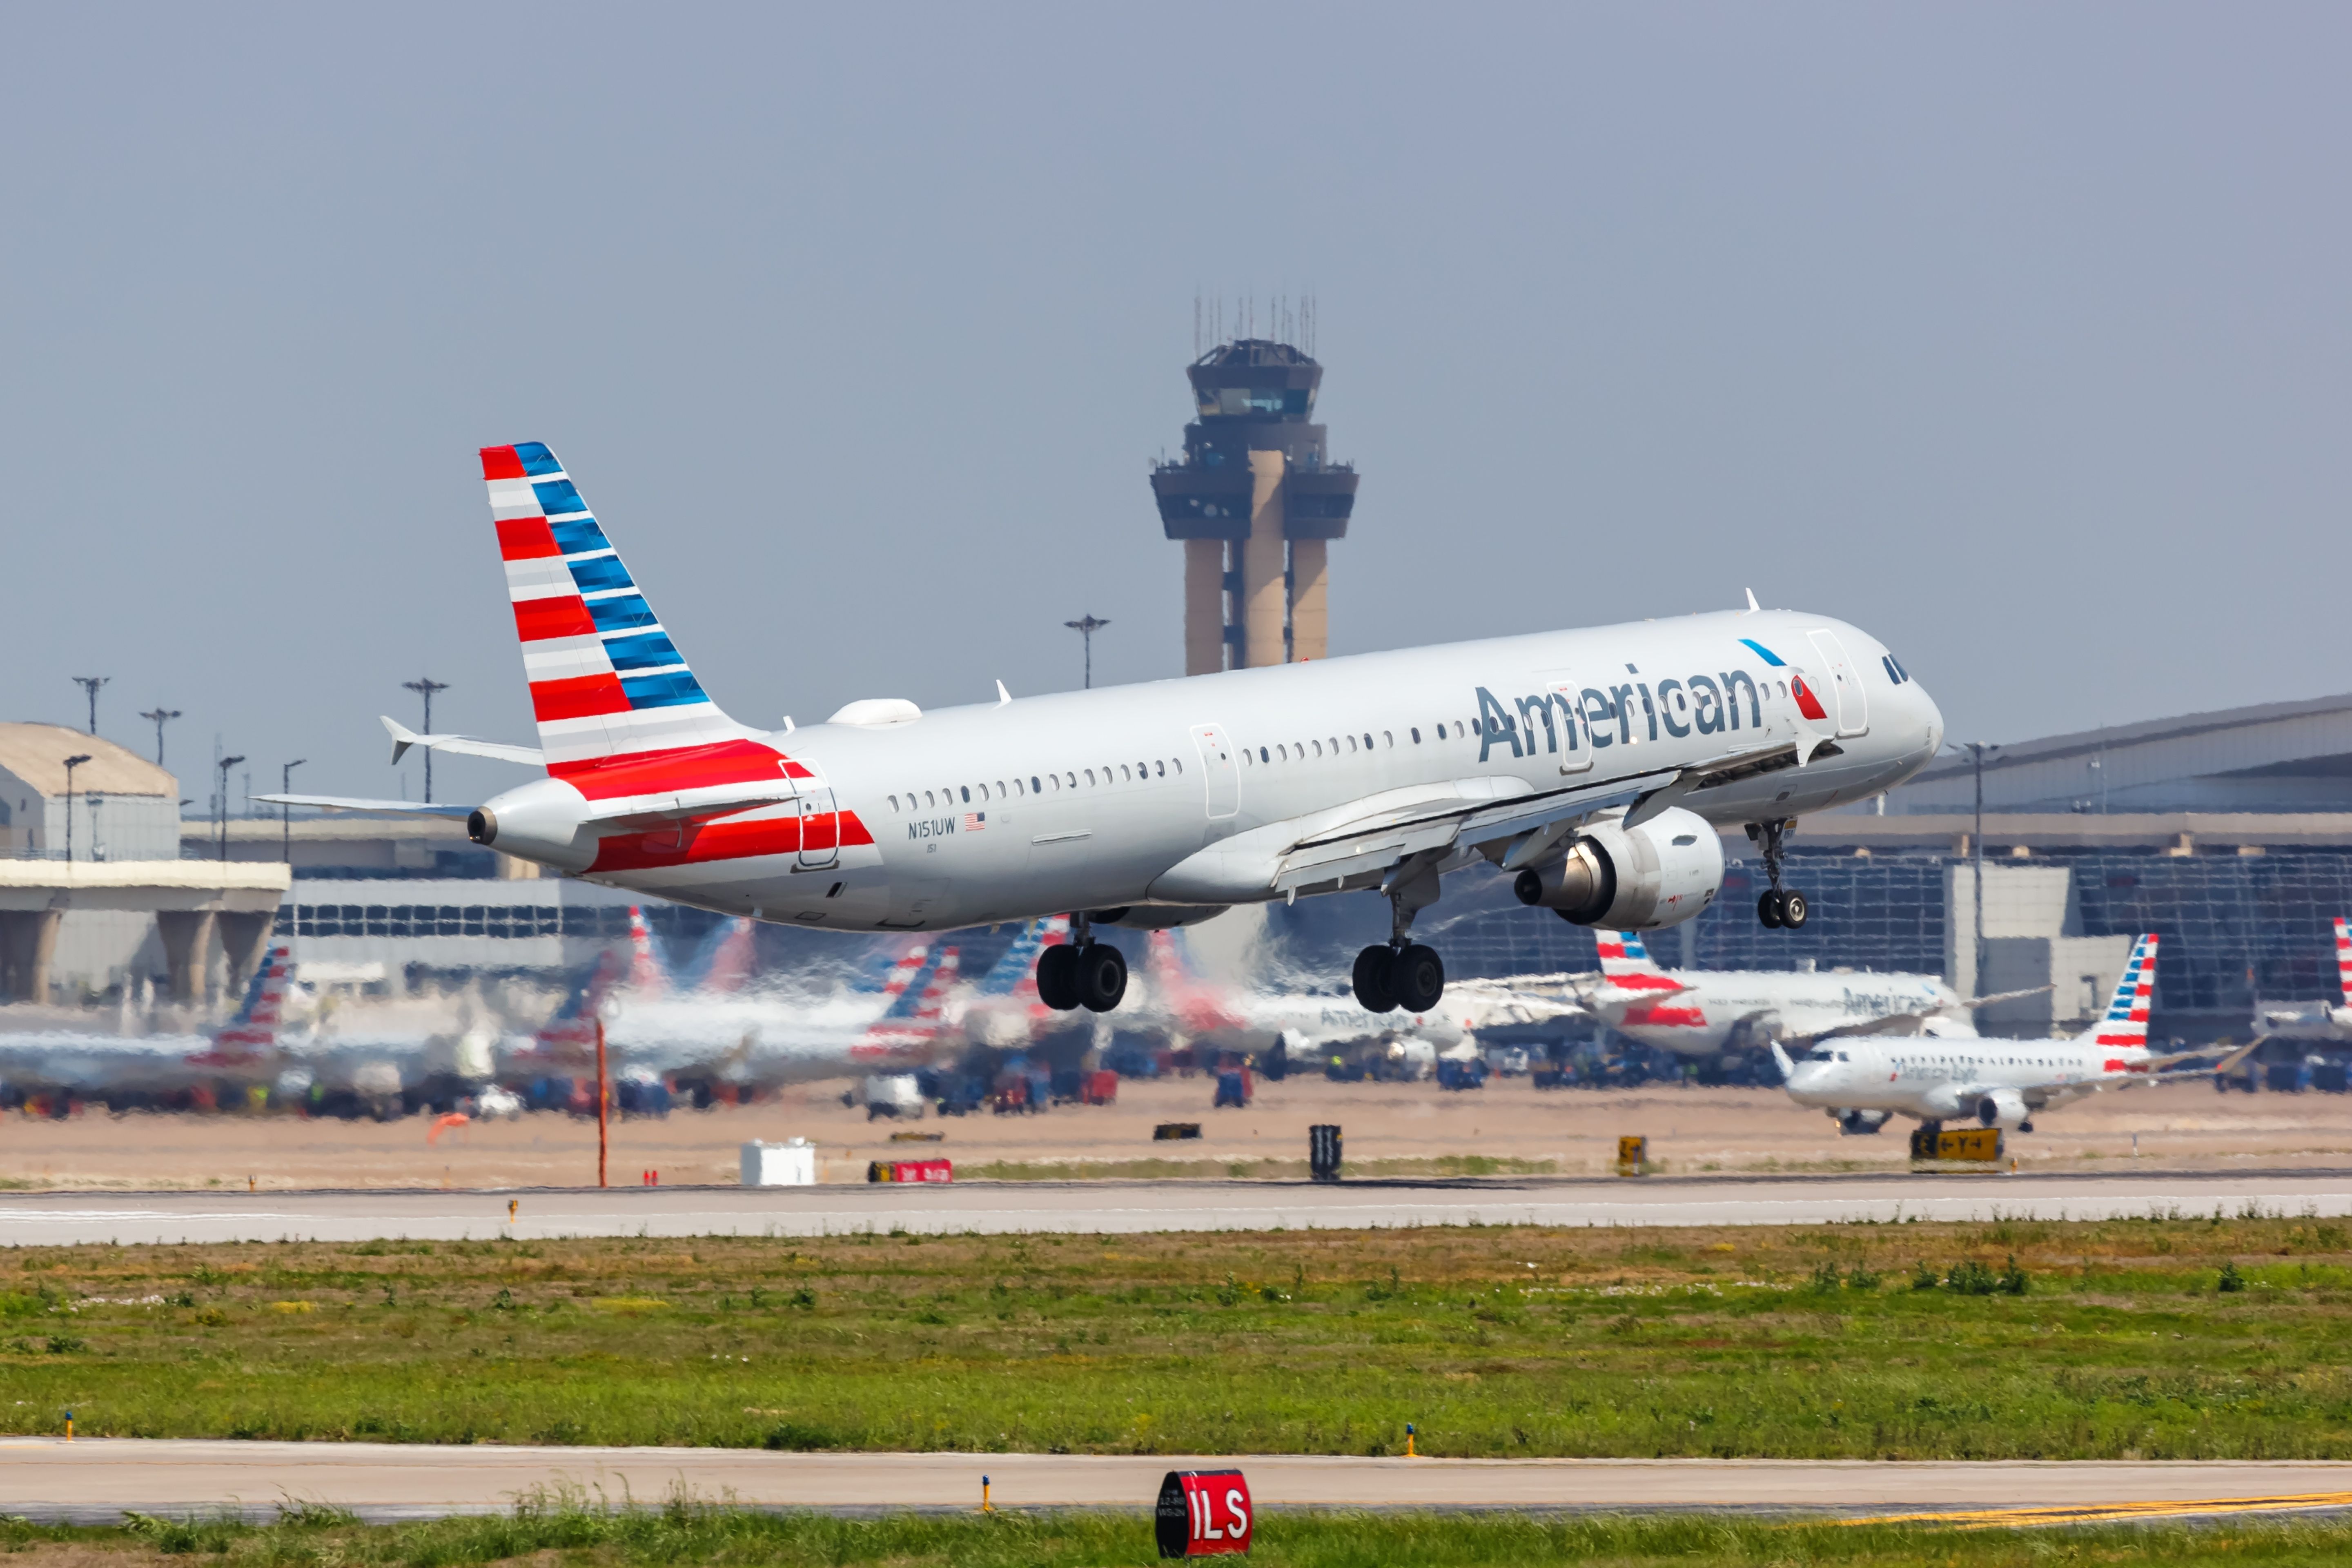 An American Airlines Airbus A321 taking off from DFW Airport.